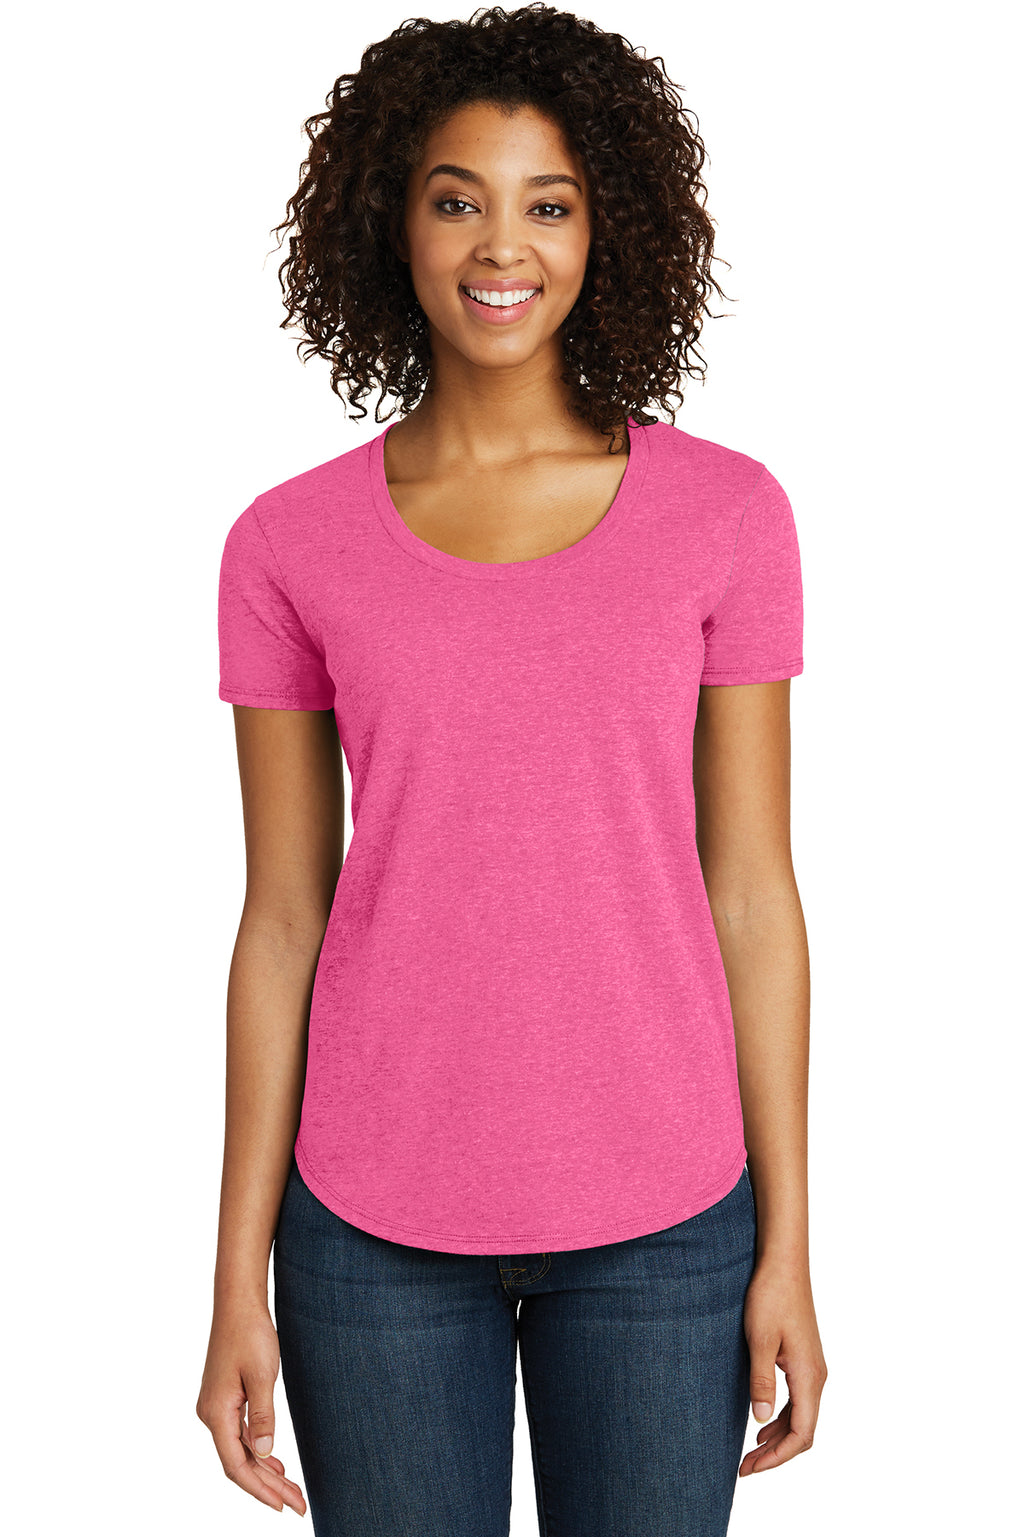 DT6401 District ® Women’s Fitted Very Important Tee ® Scoop Neck